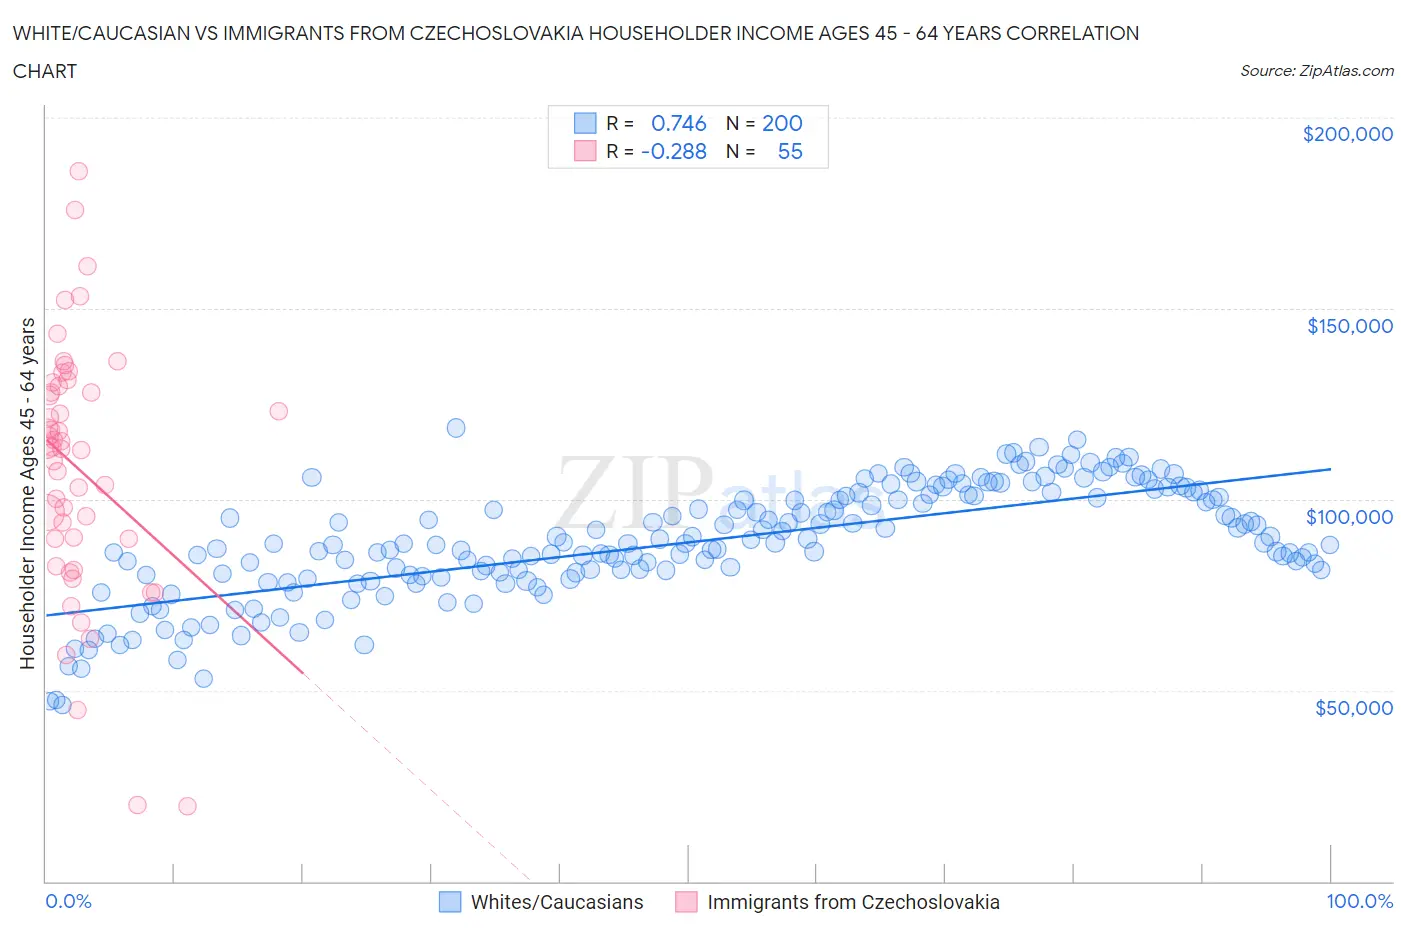 White/Caucasian vs Immigrants from Czechoslovakia Householder Income Ages 45 - 64 years